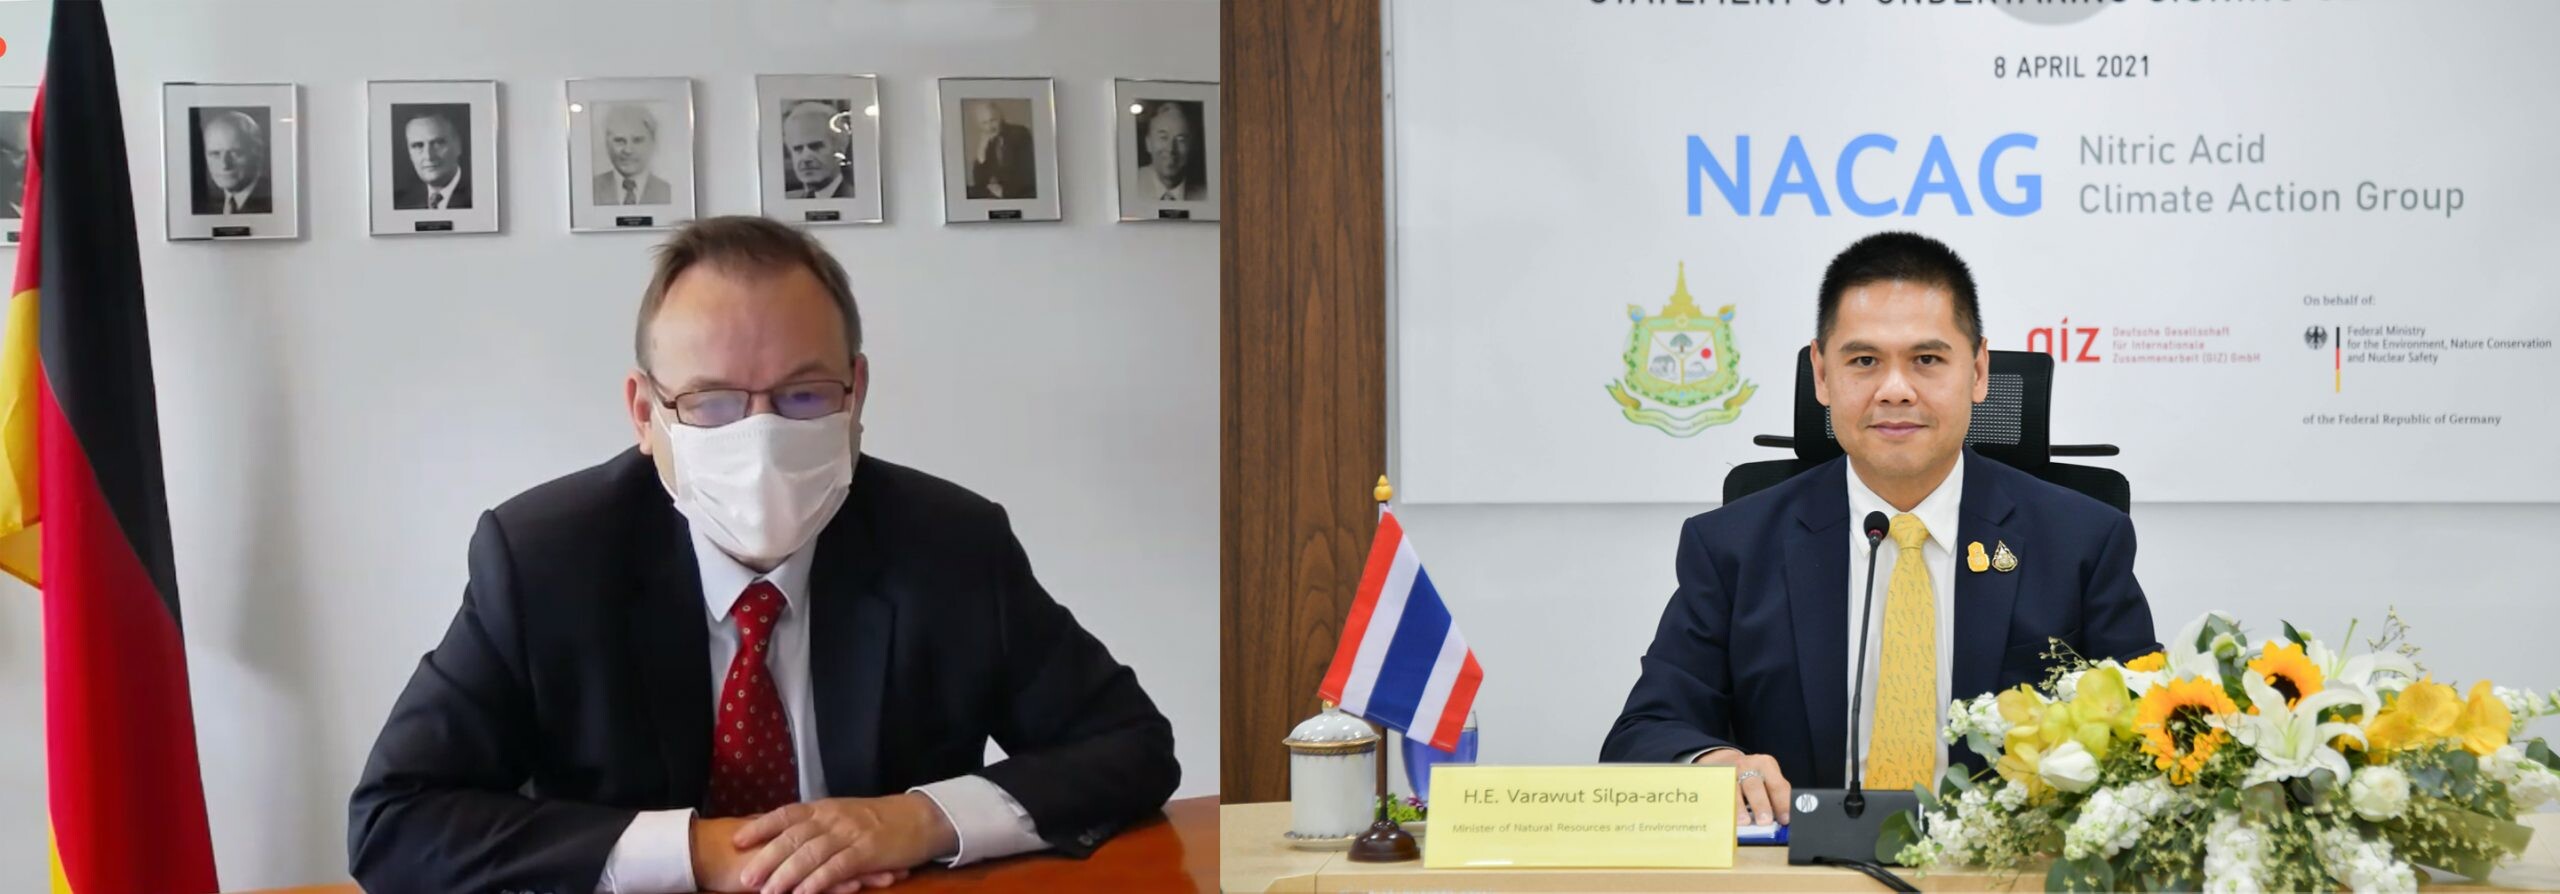 Thai Ministry of Natural Resources and Environment undertakes climate action to reduce nitrous oxide emission